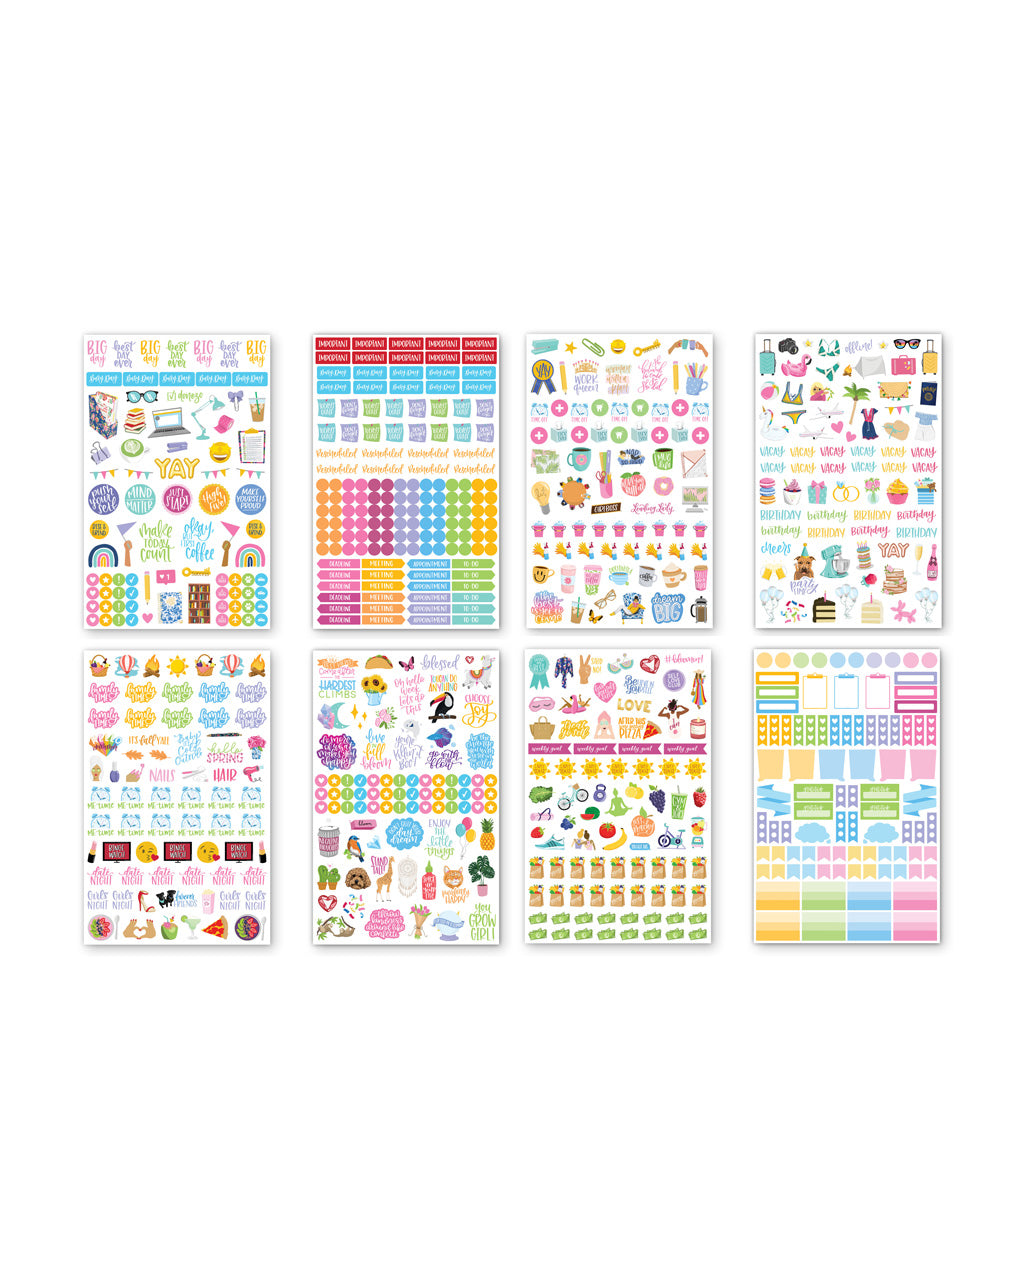 https://cdn.shopify.com/s/files/1/0787/5255/products/bando-3p-bloom-classic-planner-stickers-01.jpg?v=1625177485